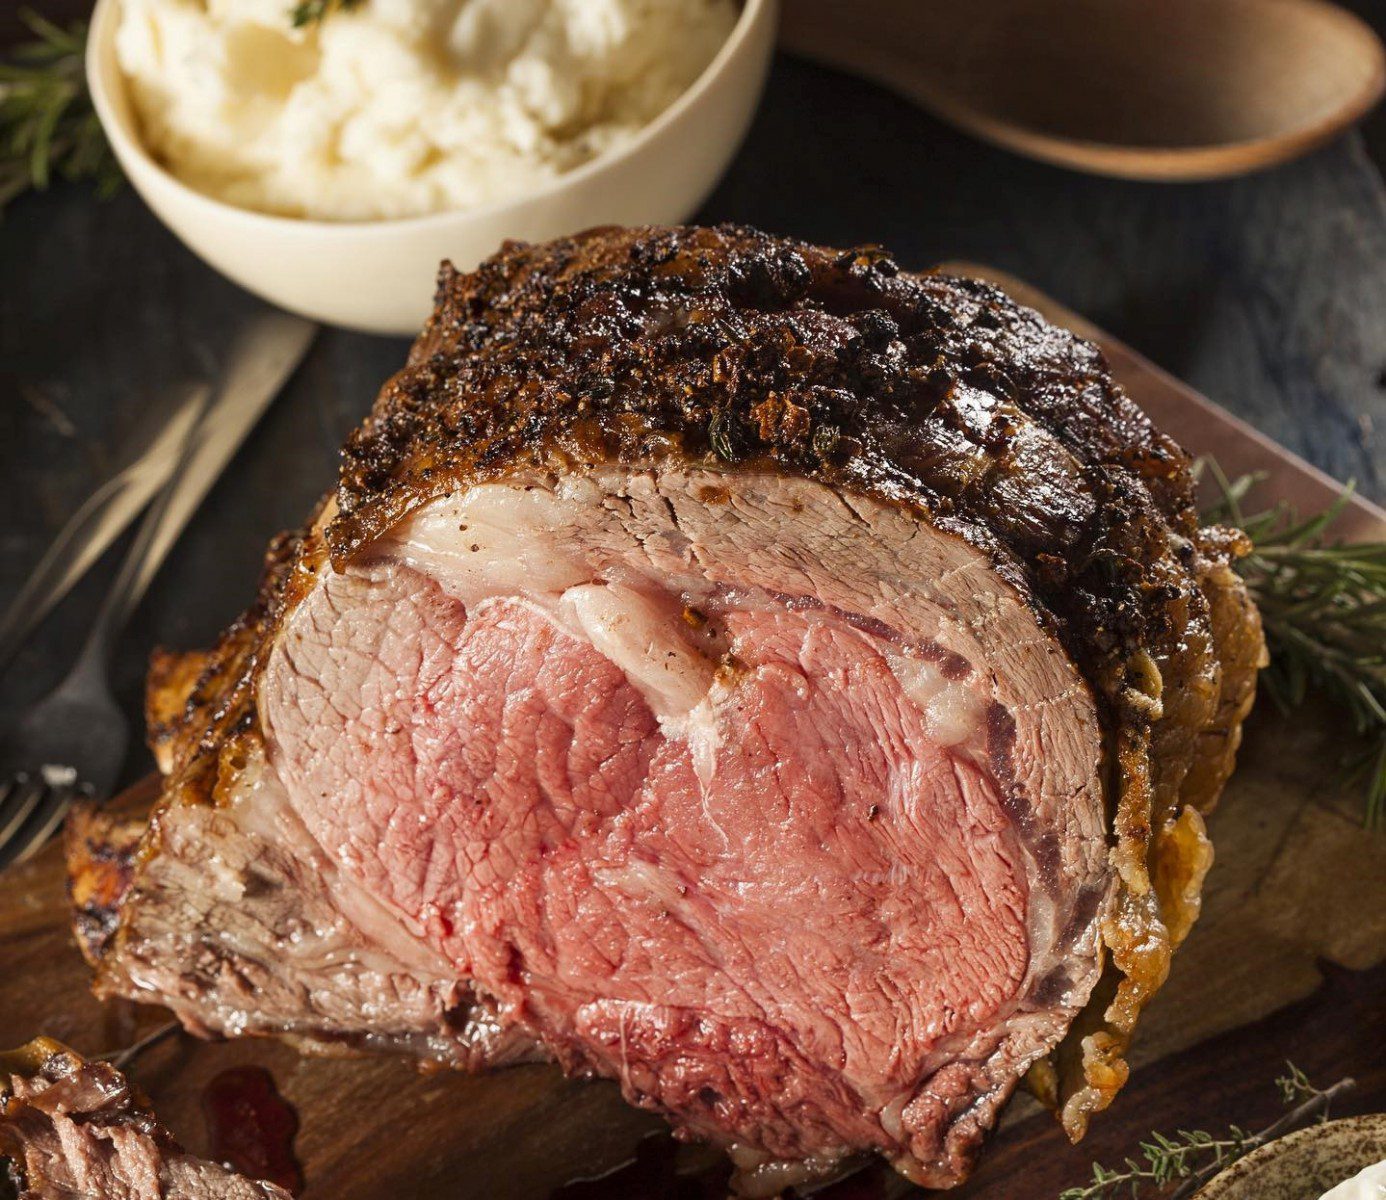 An image of a prime rib